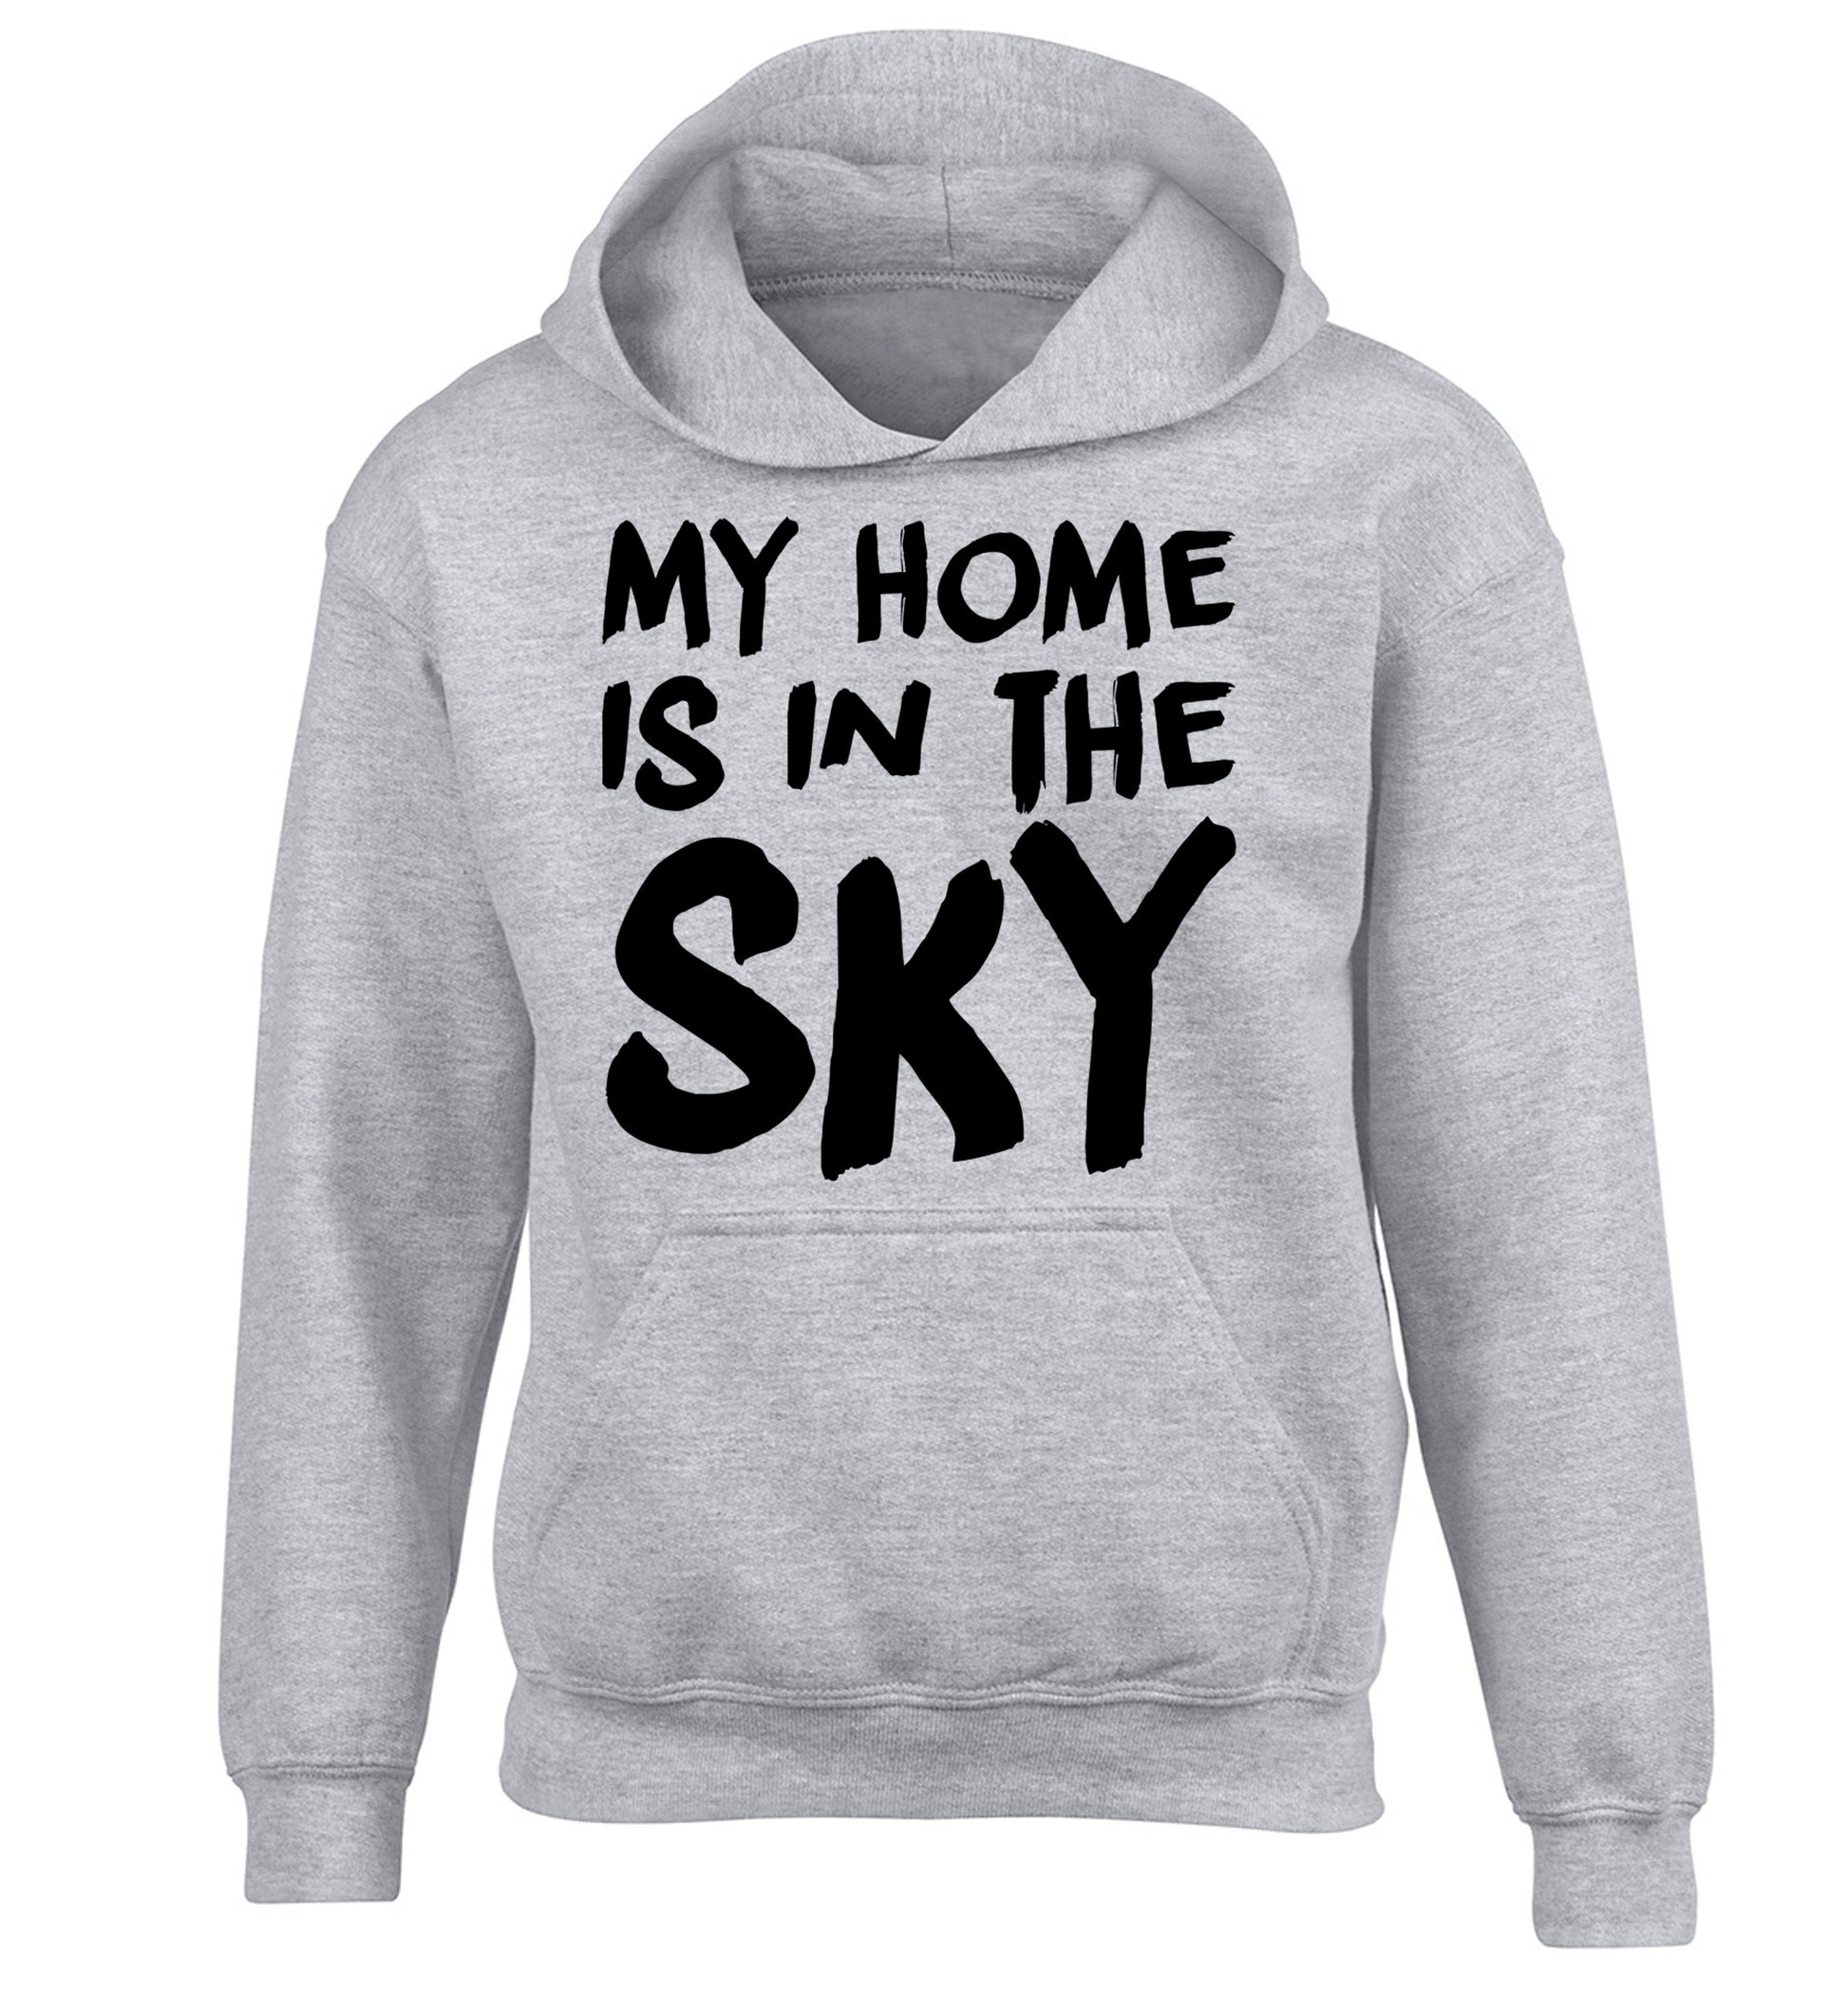 My home is in the sky children's grey hoodie 12-14 Years